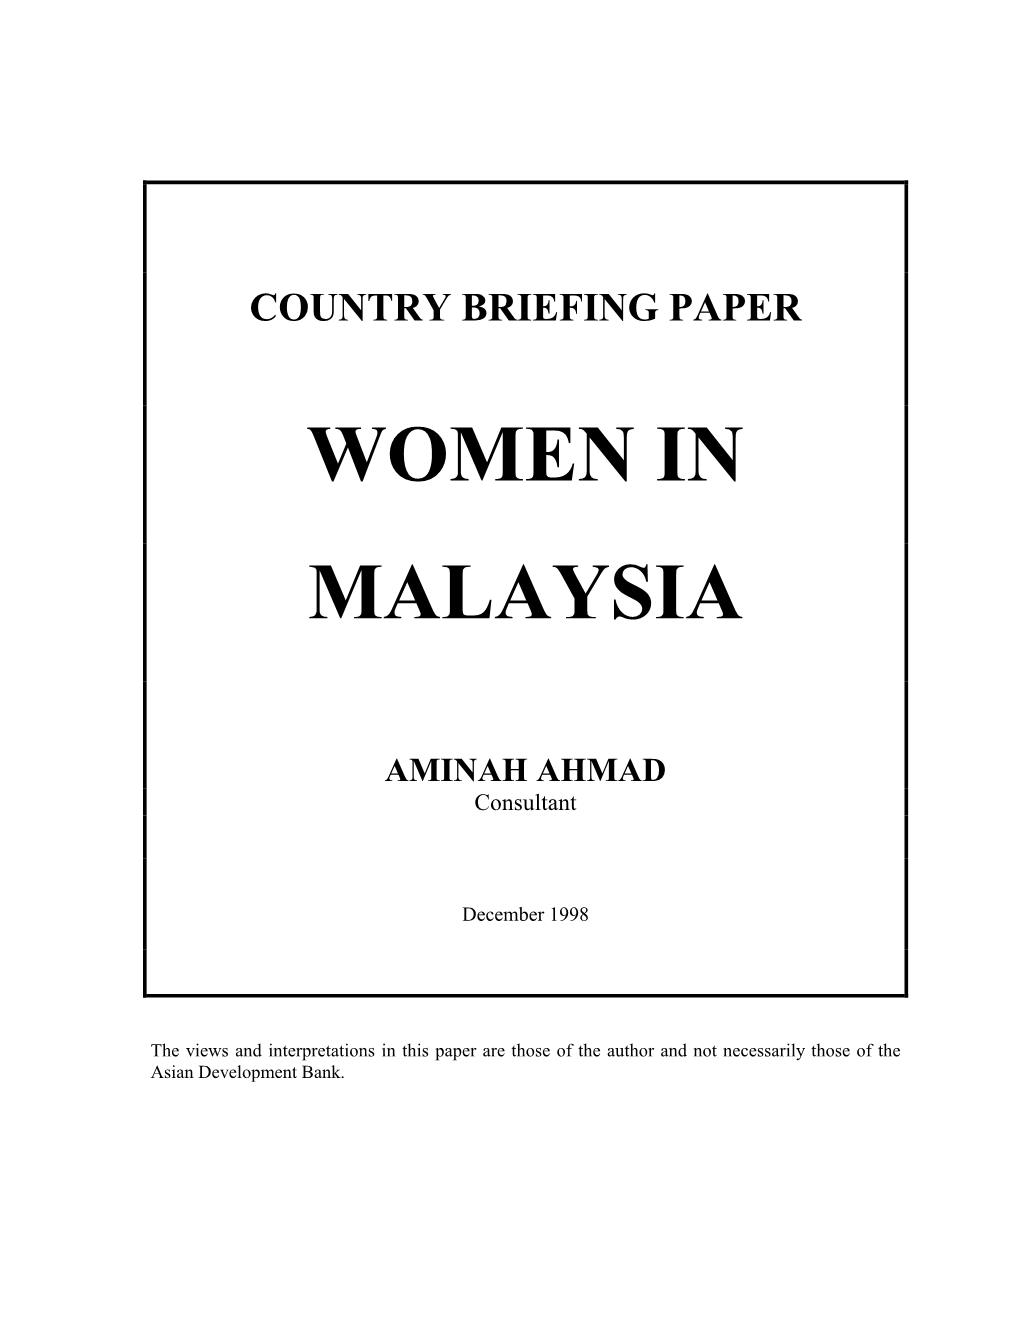 Women in Malaysia: Country Briefing Paper